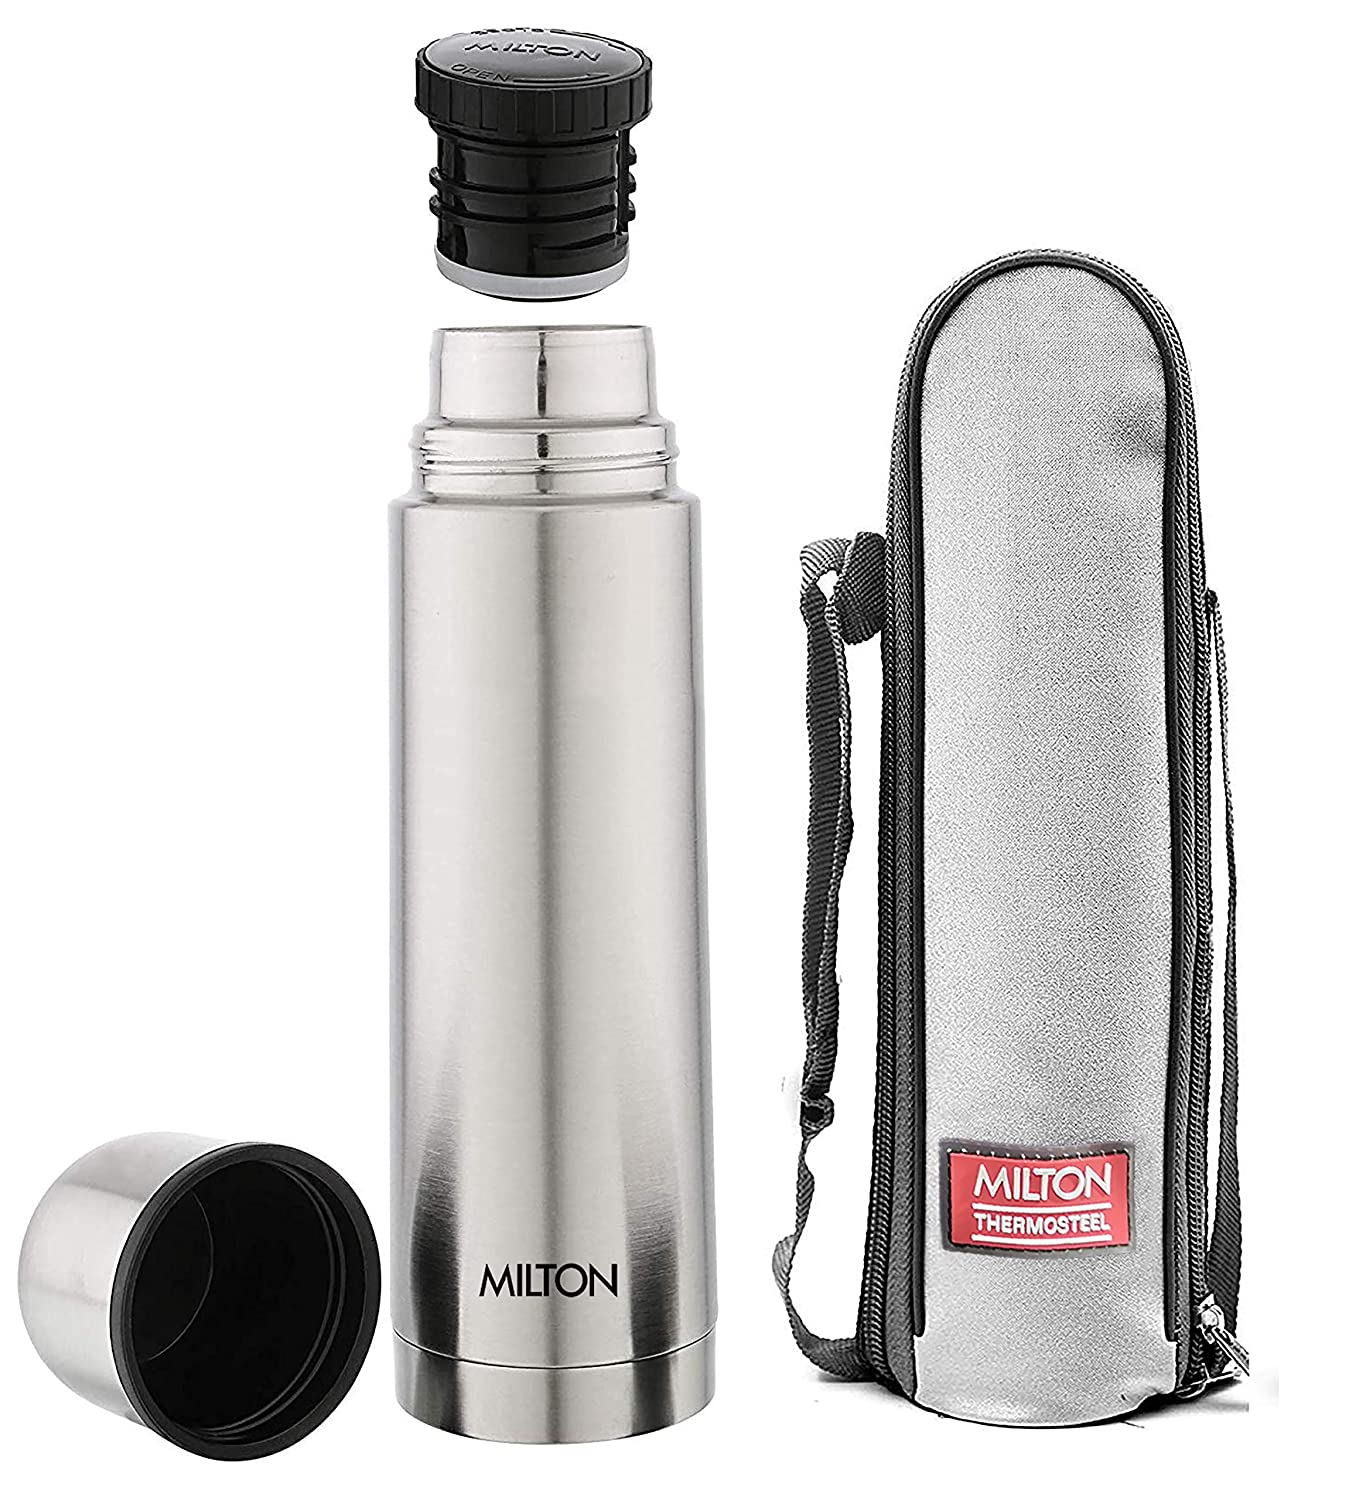  Milton plain lid 1000 thermosteel 24 hours hot and cold water bottle 